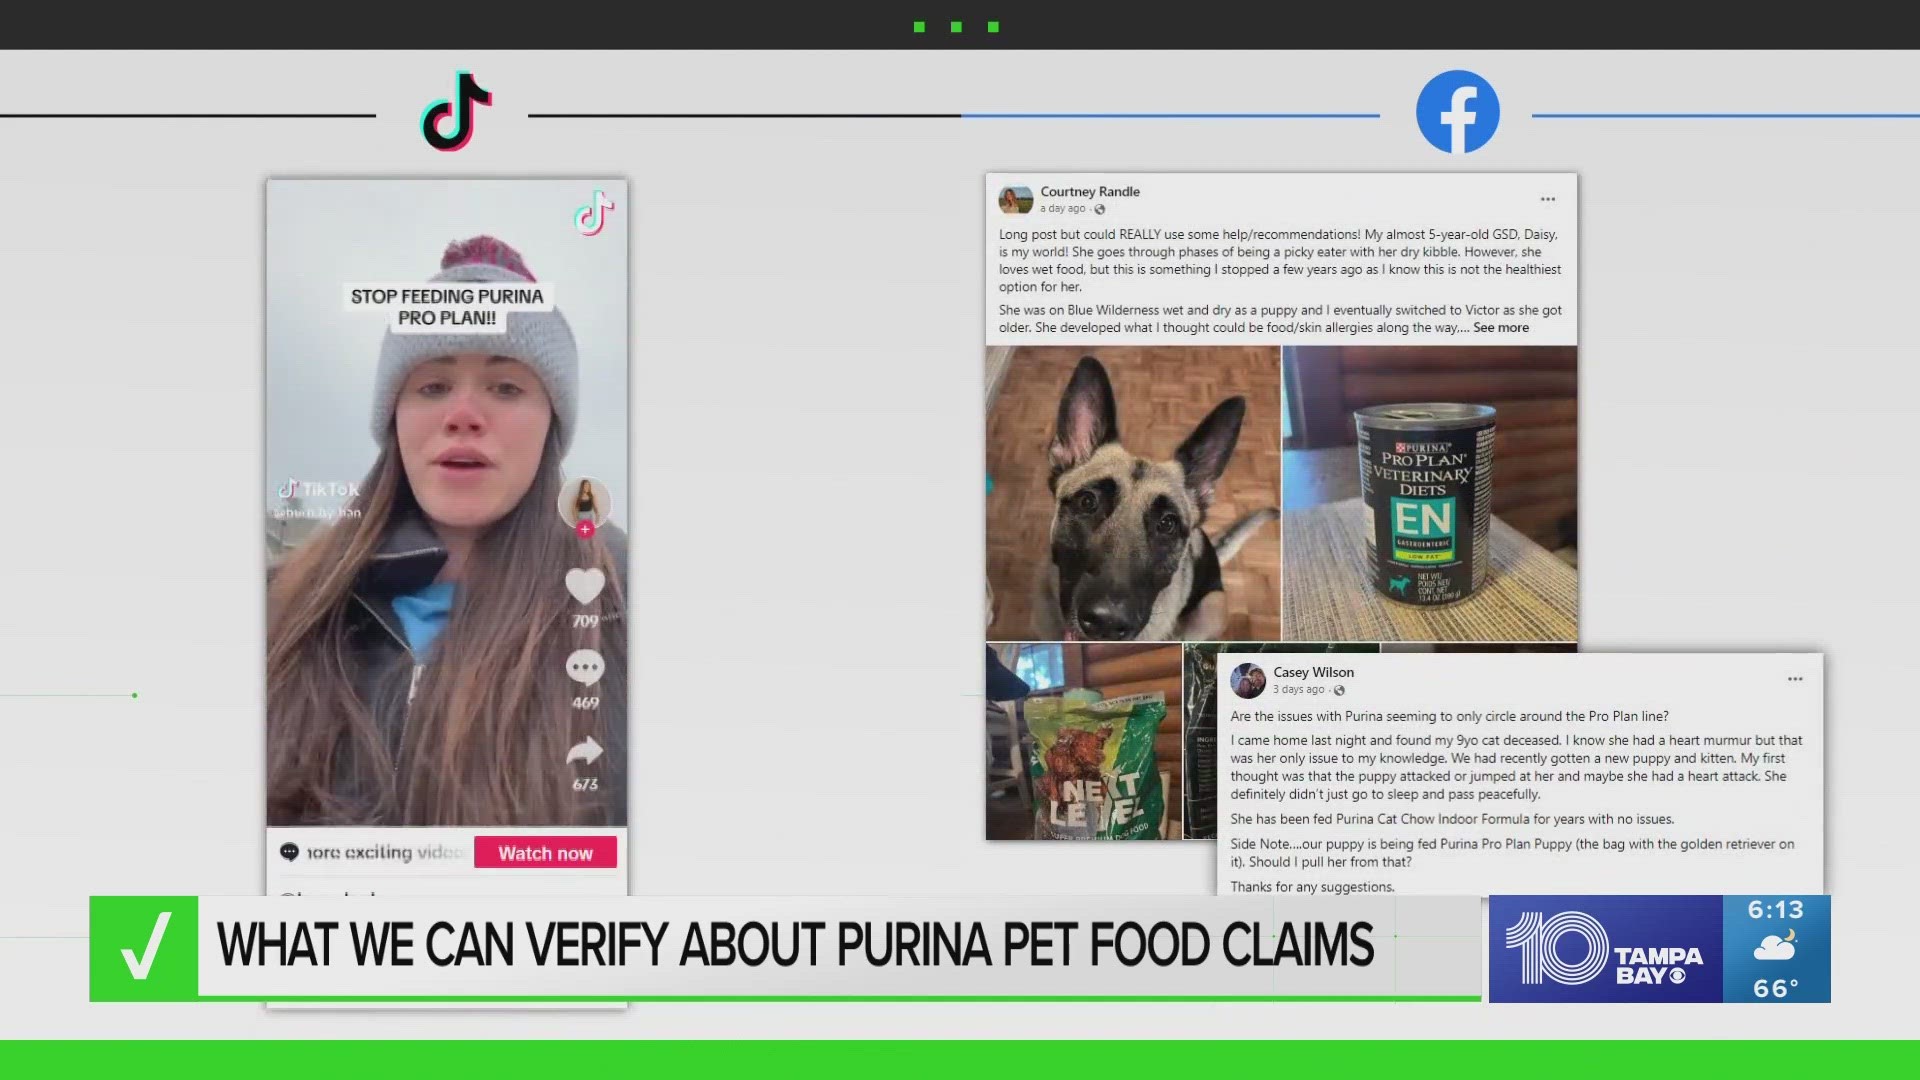 Safety concerns have been raised in viral TikToks about Purina's Pro Plan pet food. The company says the claims are "online rumors."